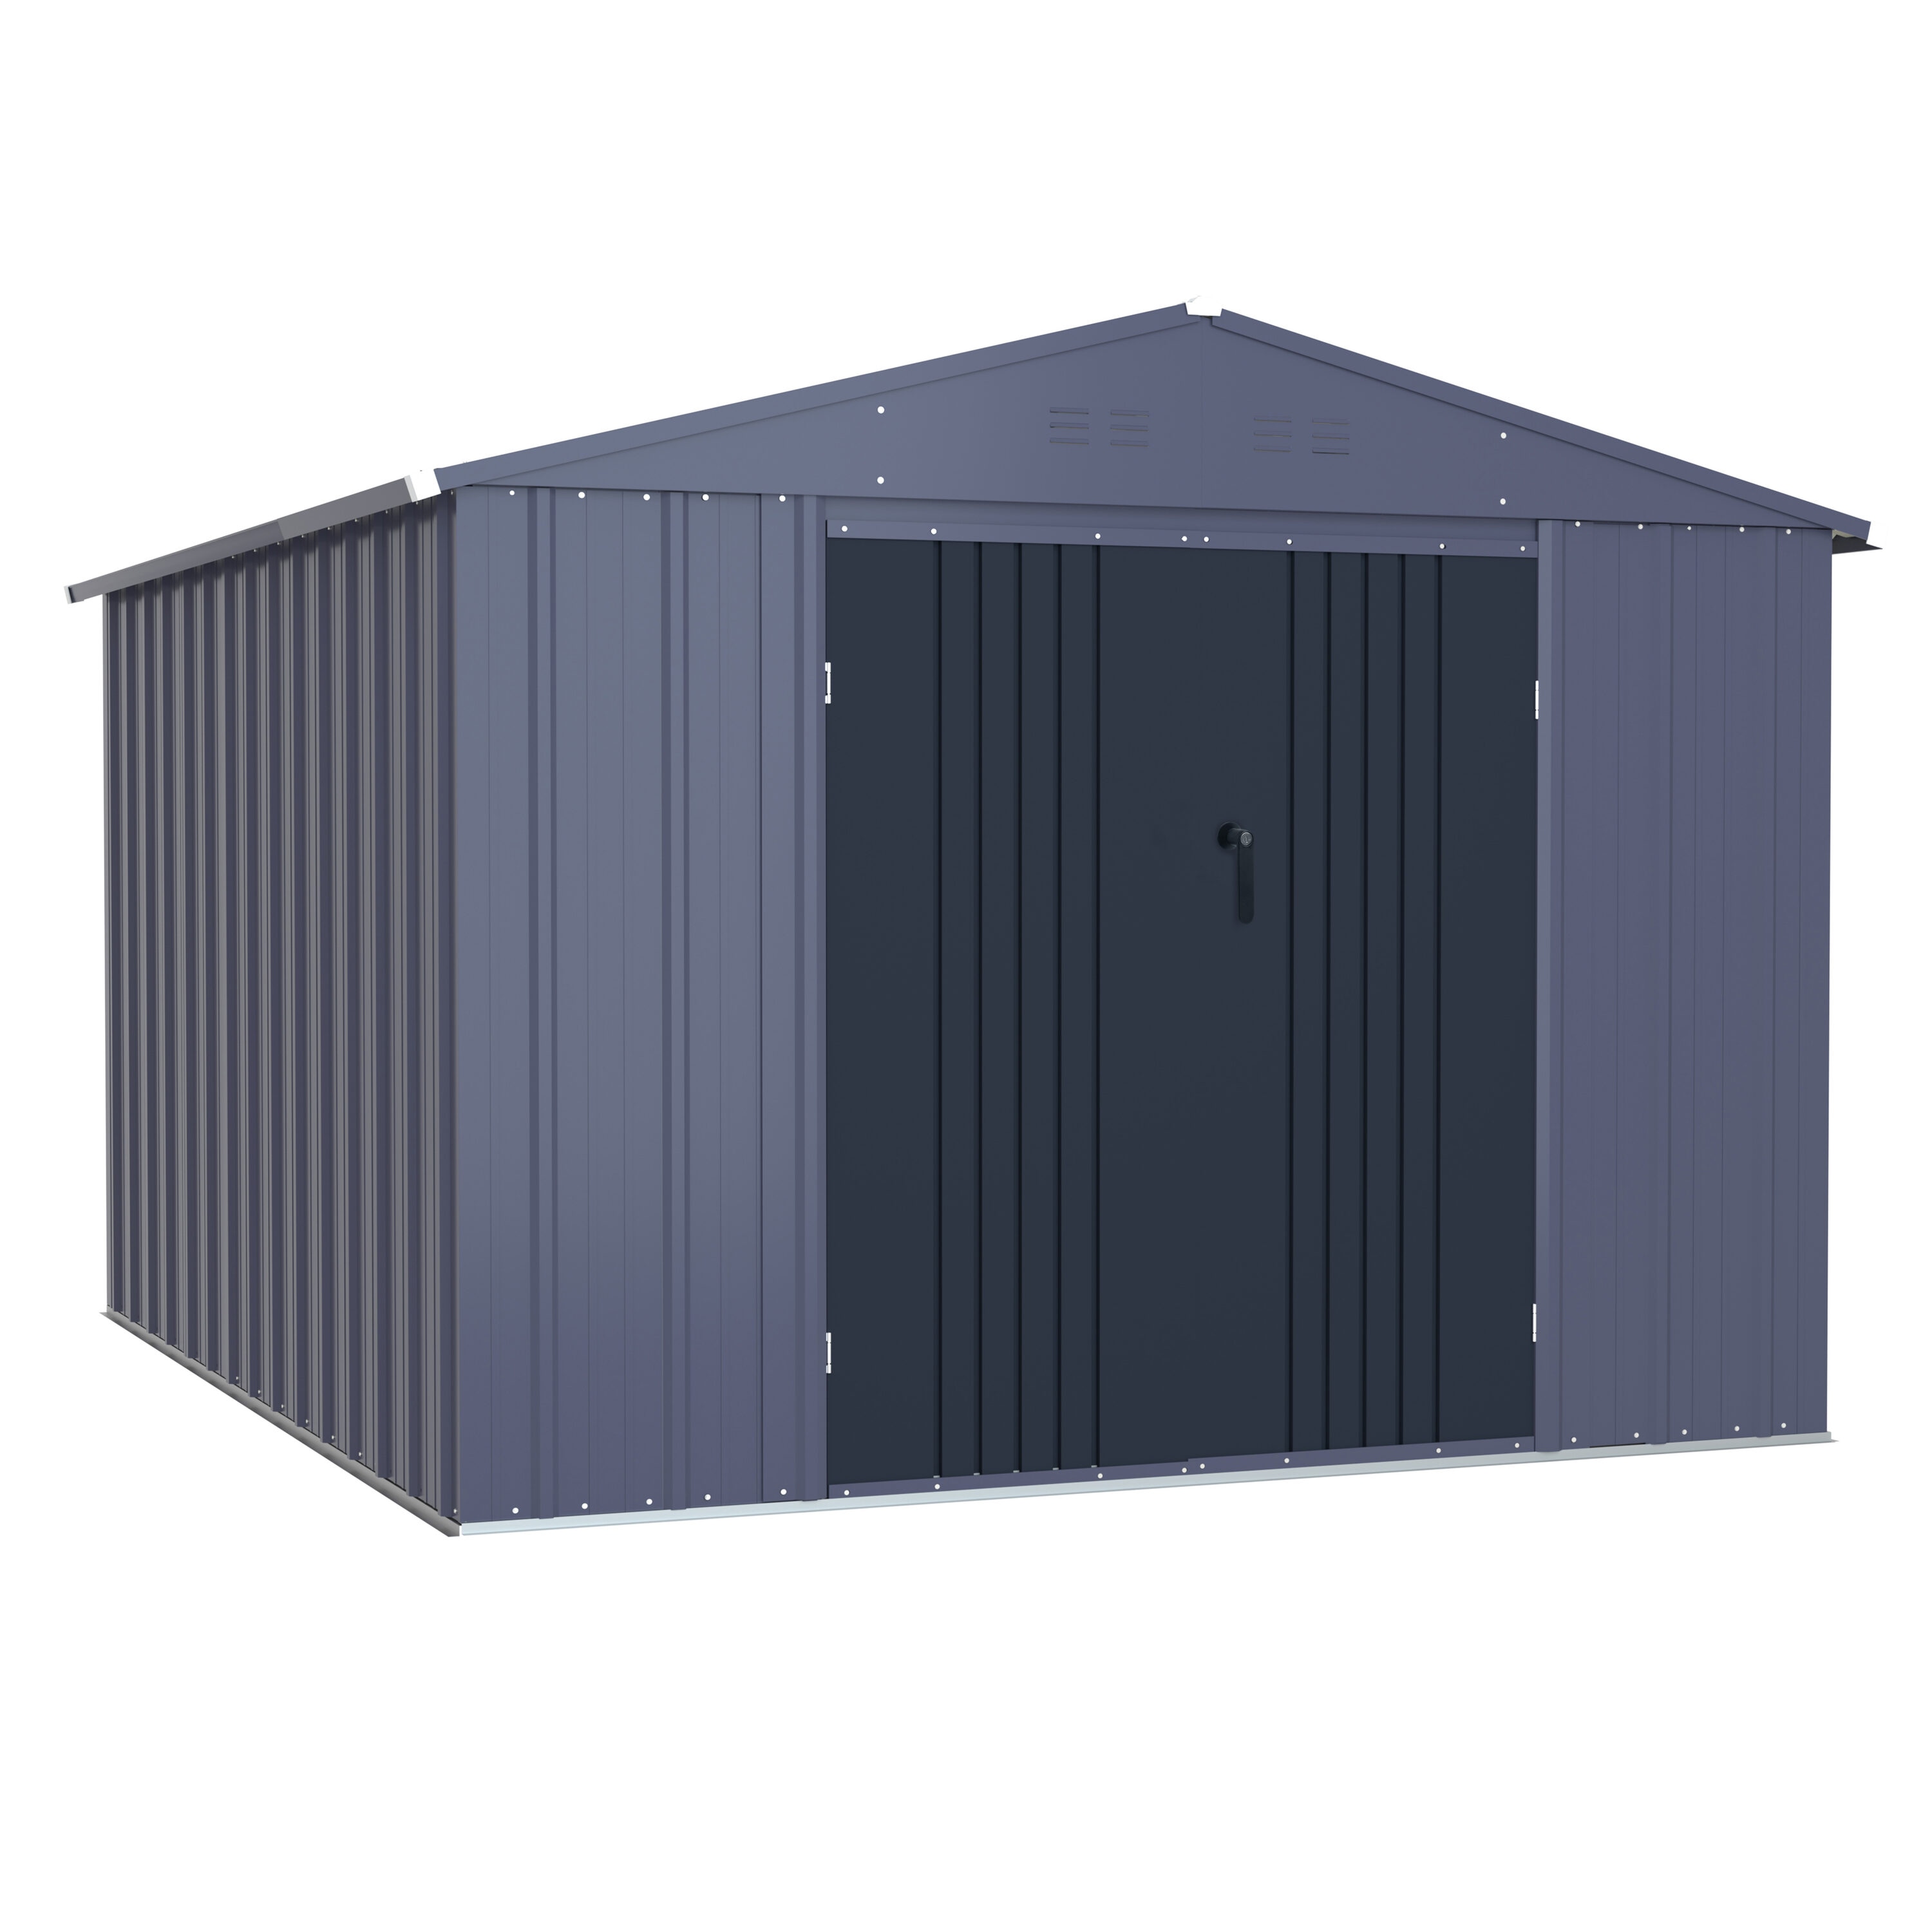 VEIKOUS 8-ft x 12-ft Galvanized Steel Storage Shed in the Metal 